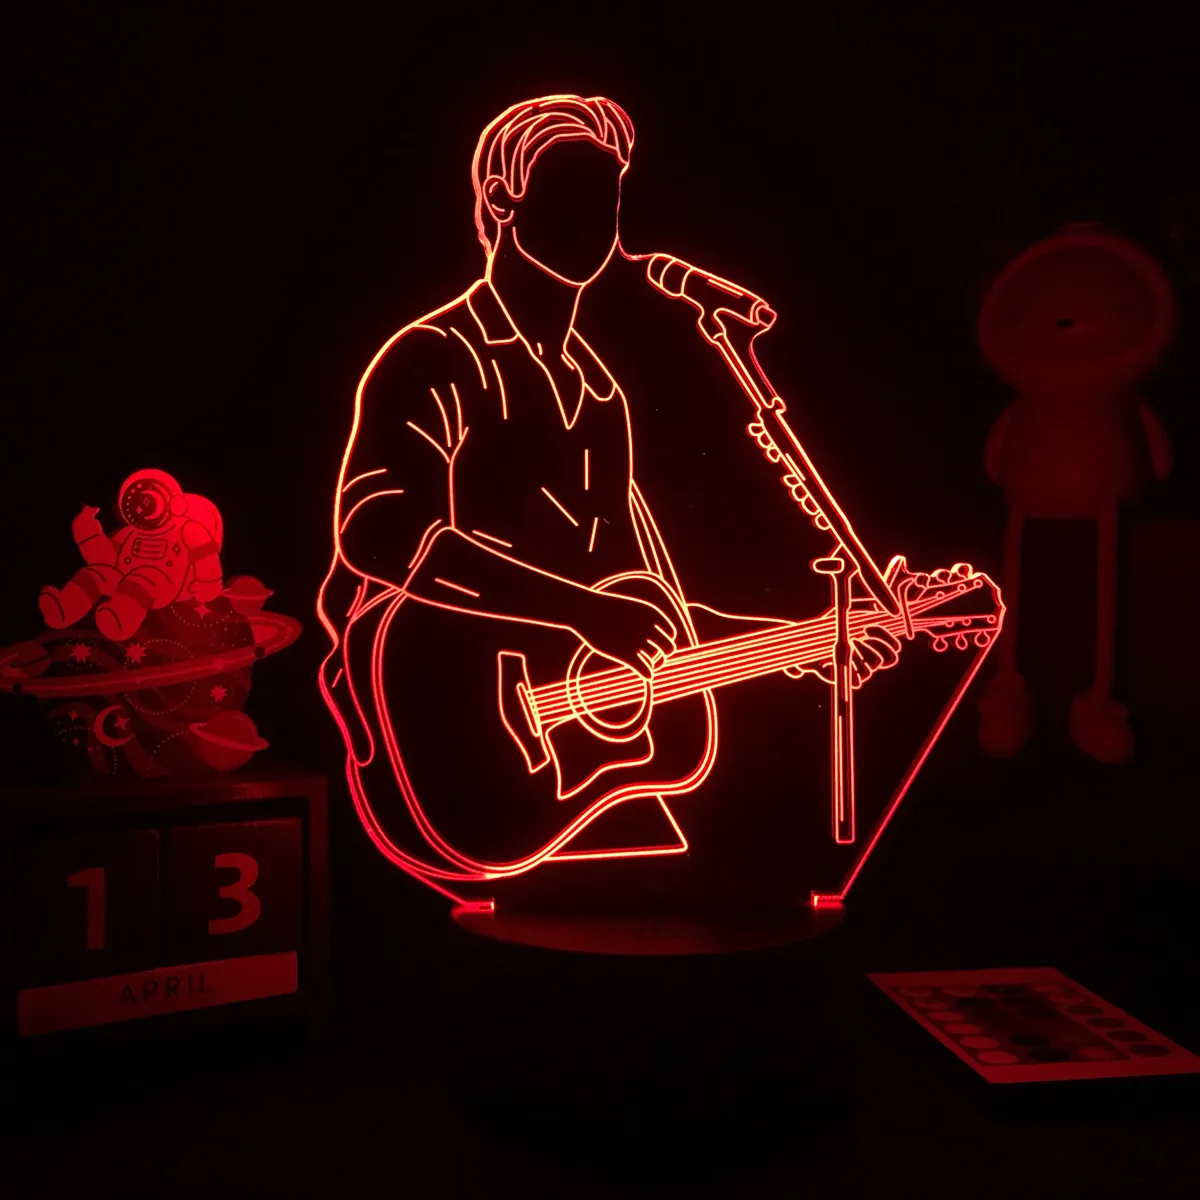 Canada Singer Shawn Mendes 3D LED Lamp Color Changing Nightlight for Fans Gift Desk Lamp Bedroom Decor  Drop shipping star night light